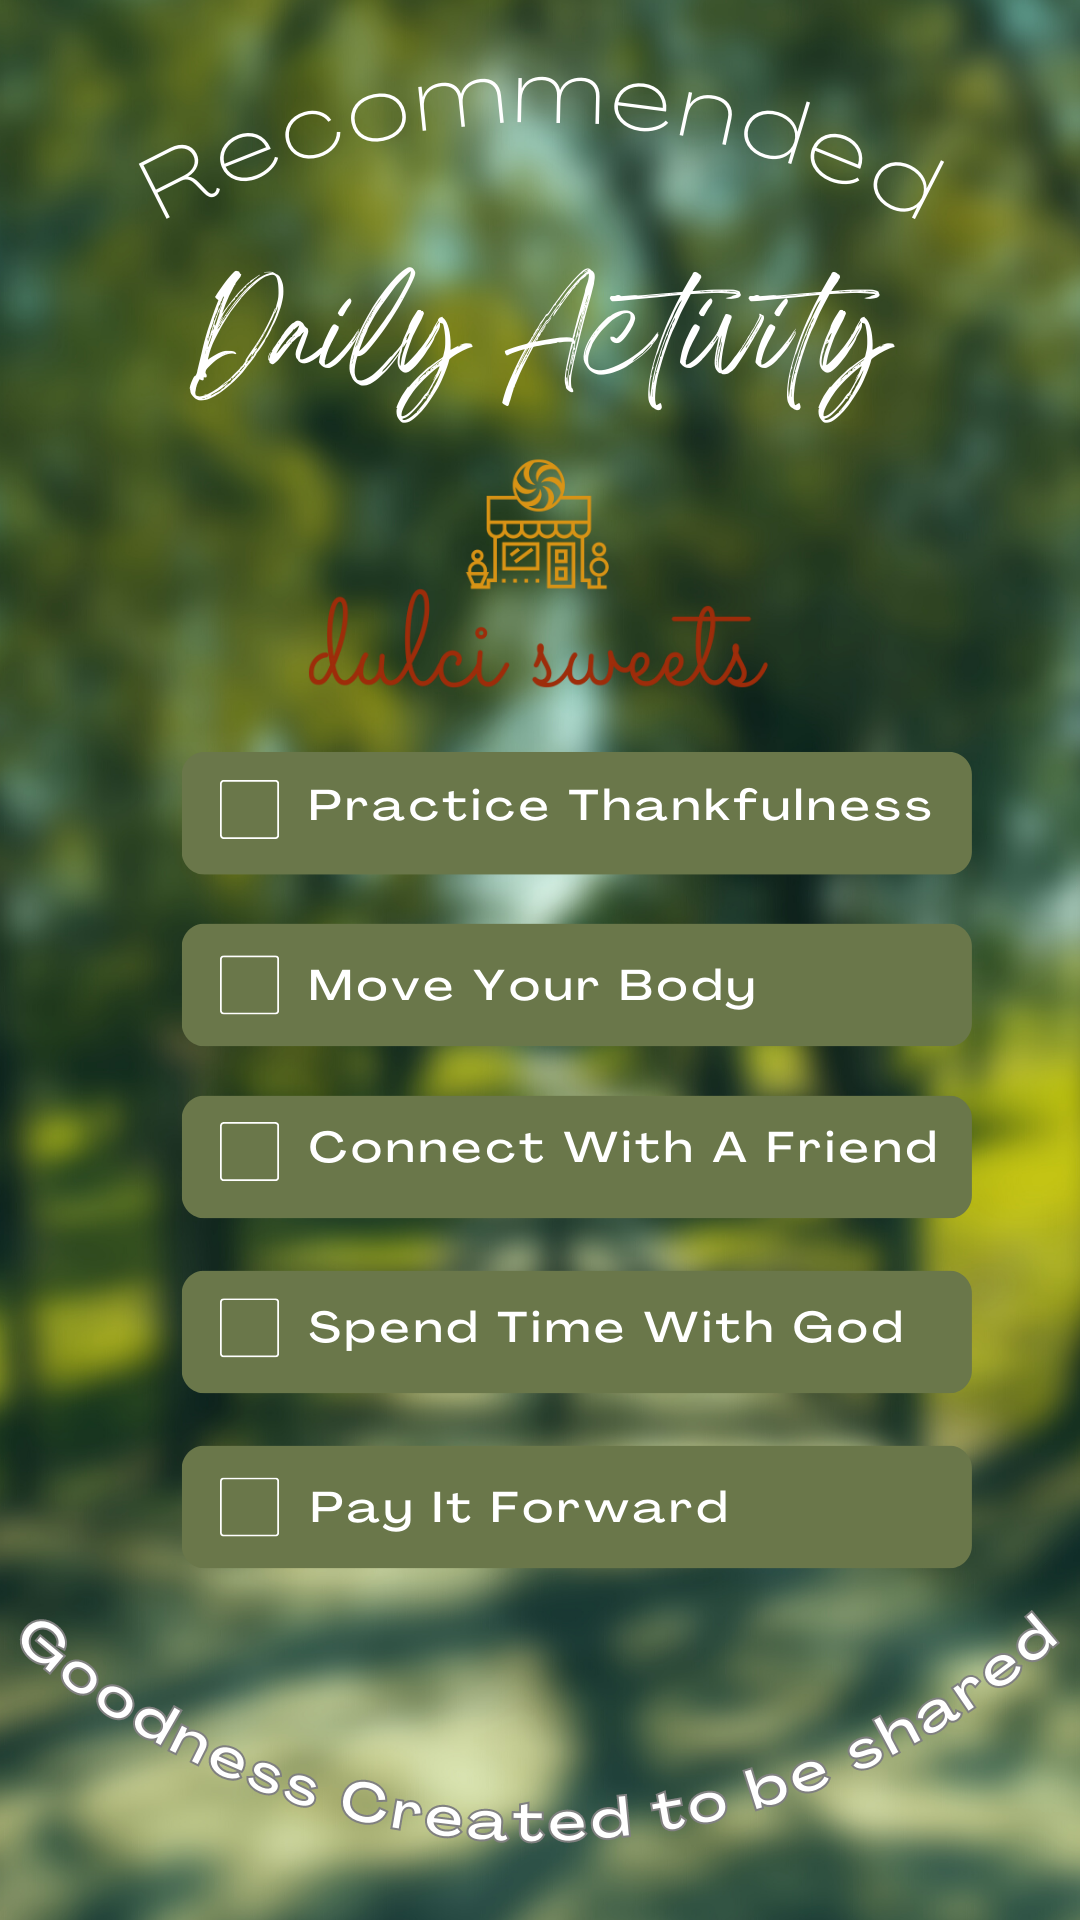 Daily Actions To Encourage Your Best